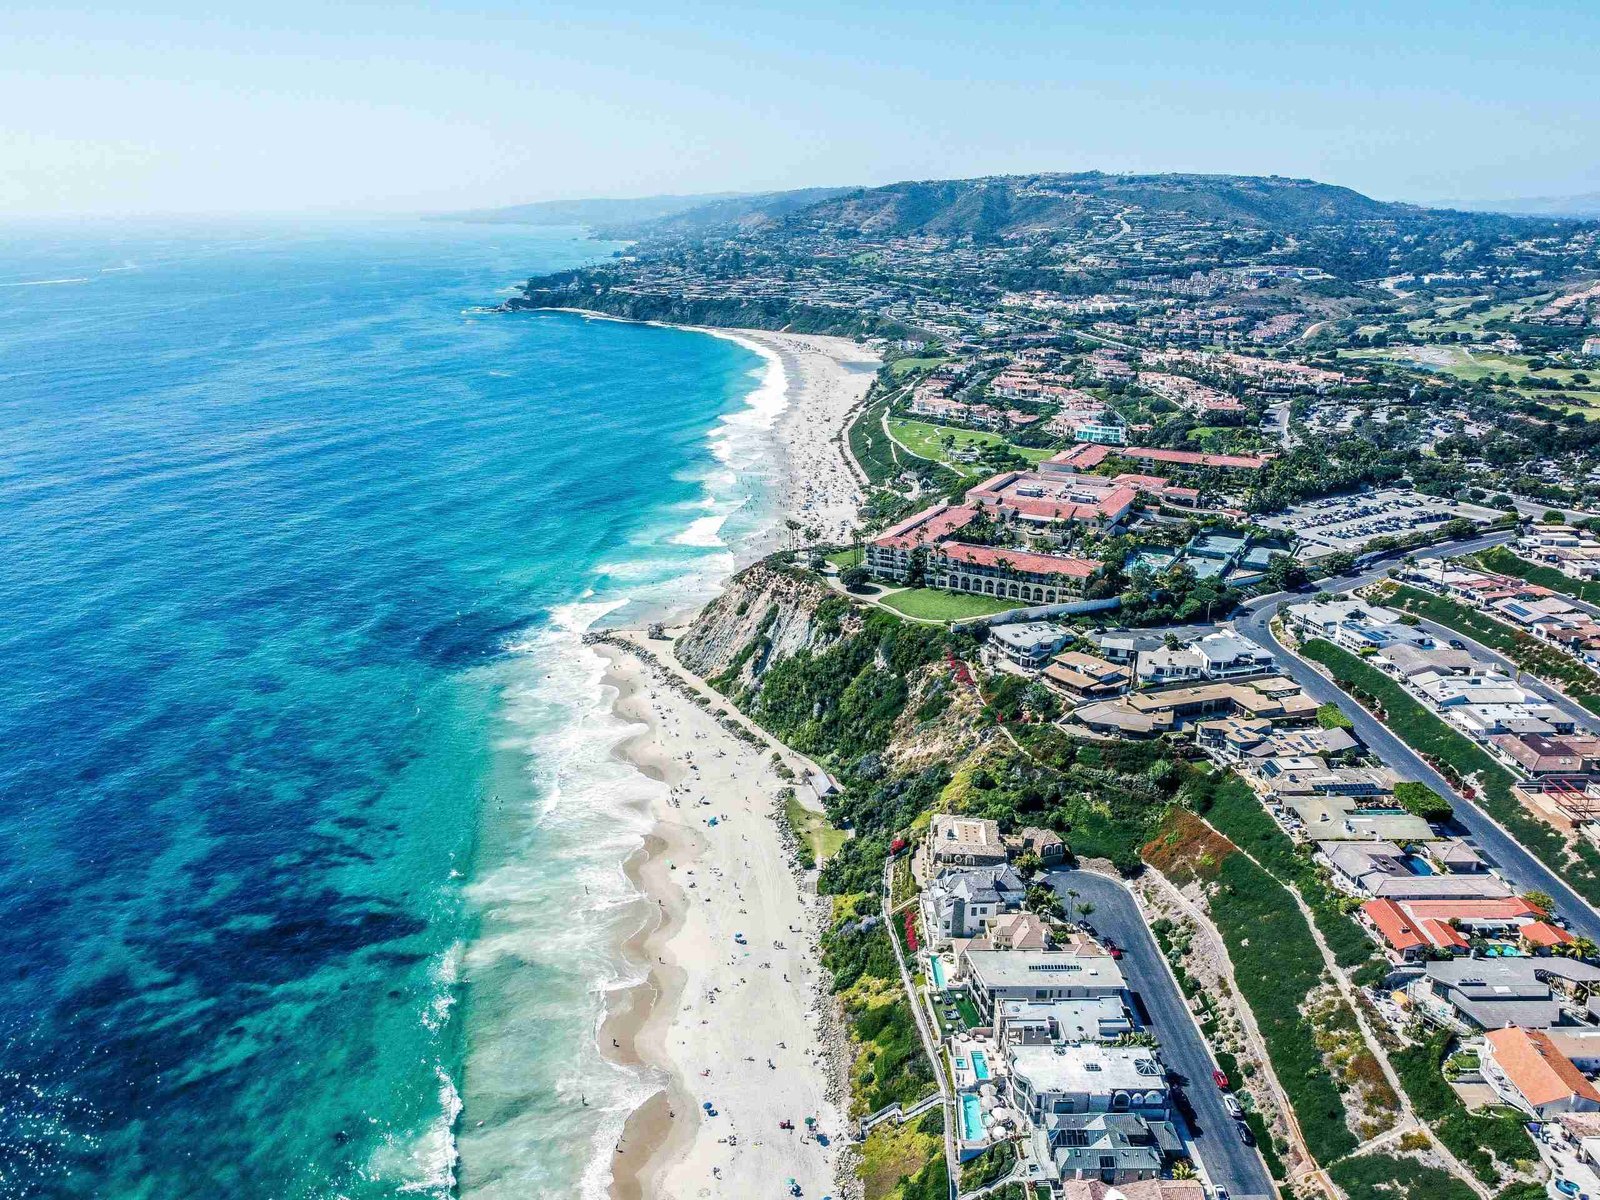 Aerial shot of Orange County with the beach on one side and the city on the other